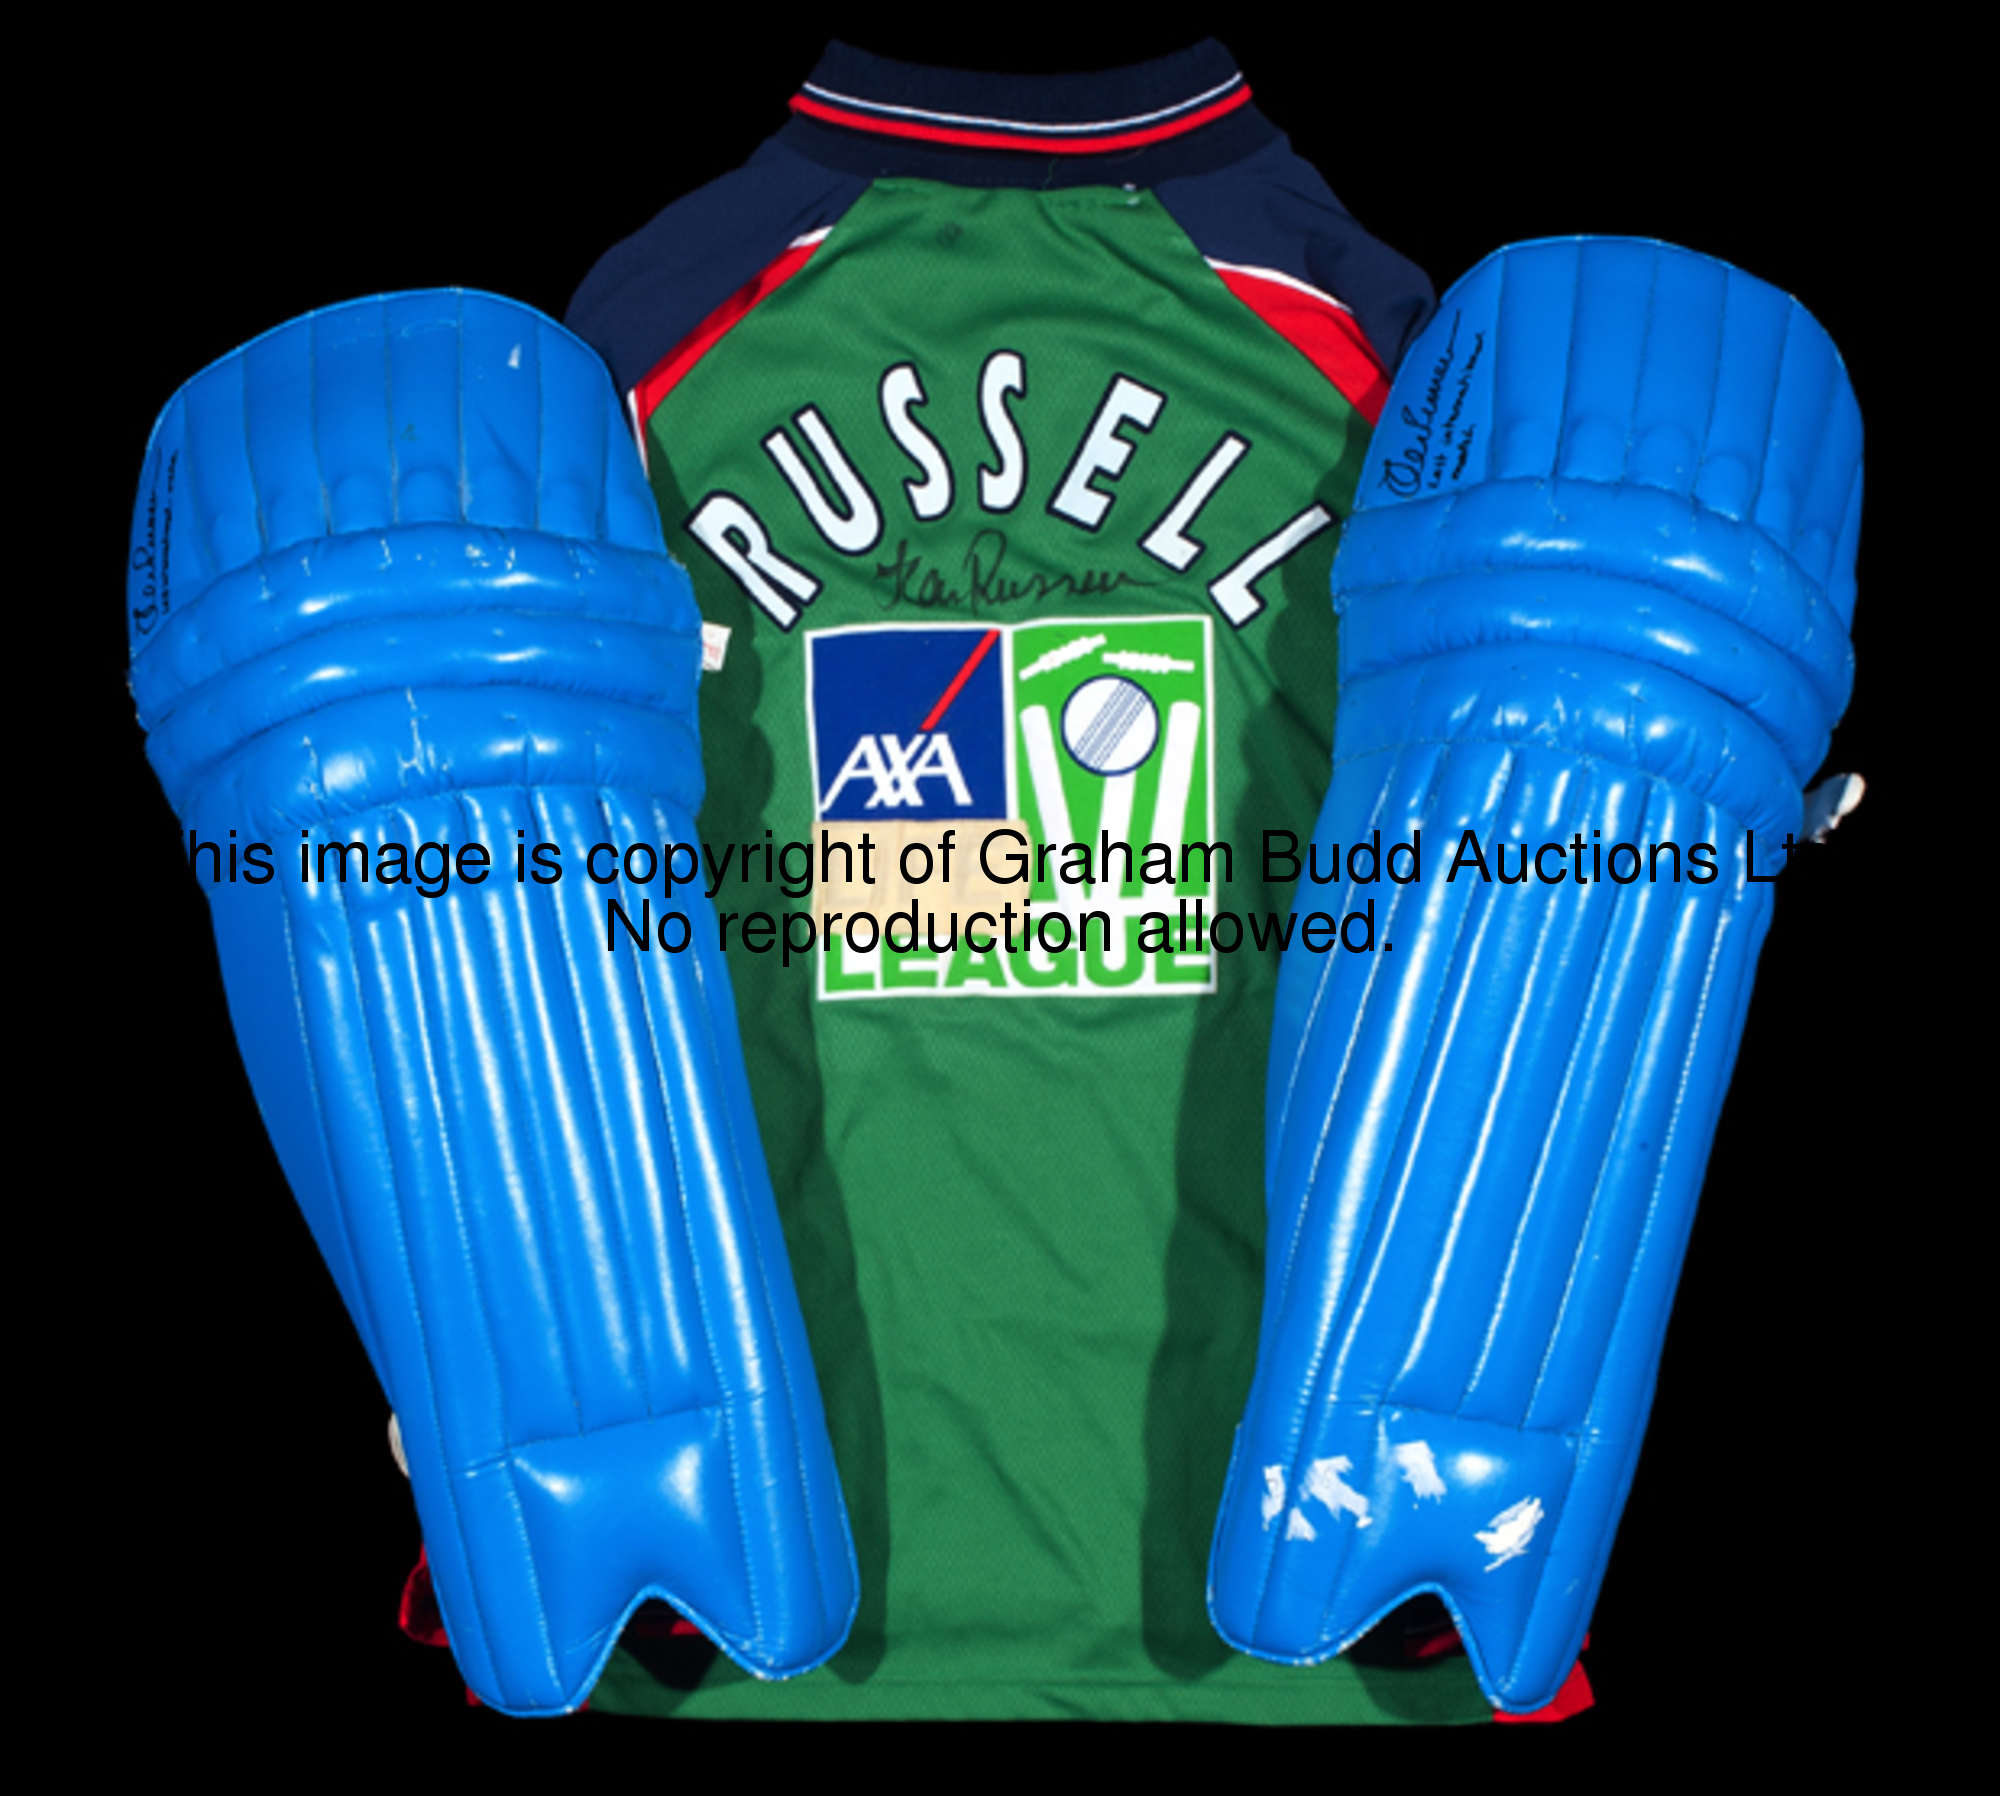 Jack Russell's cricket pads worn in his last international appearance for England in the ODI Wills I...